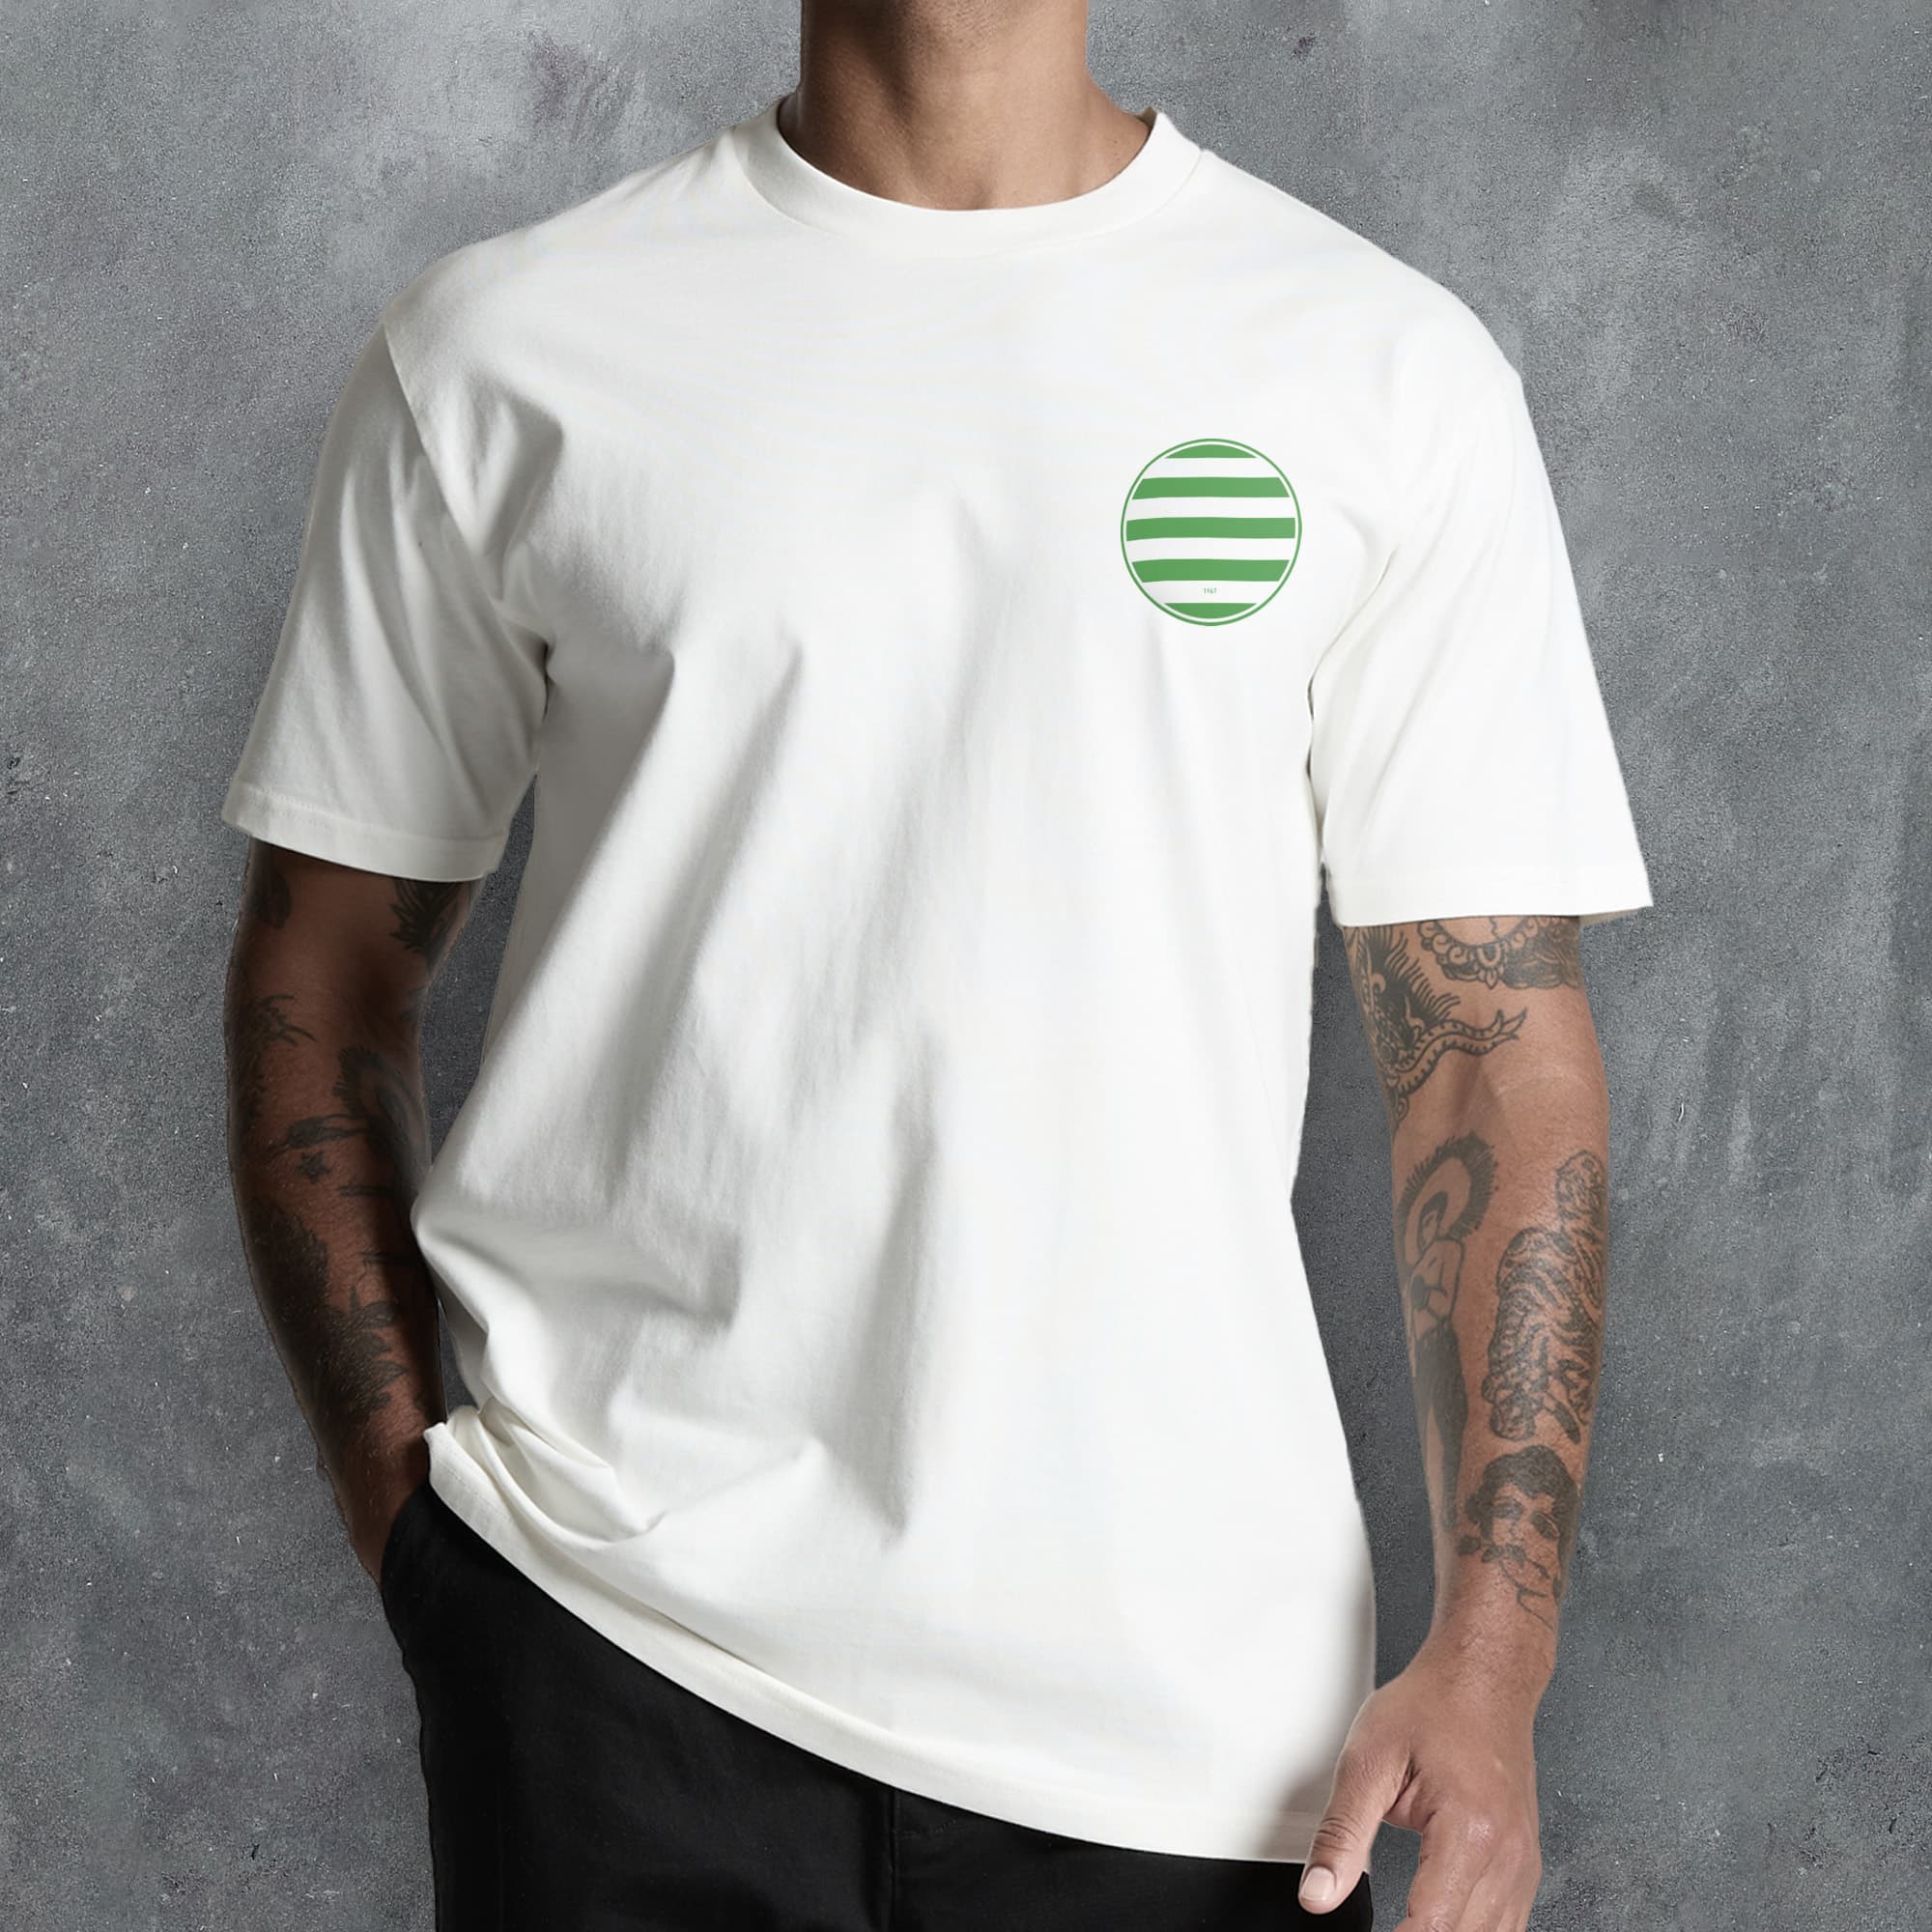 a man wearing a white t - shirt with a green circle on it